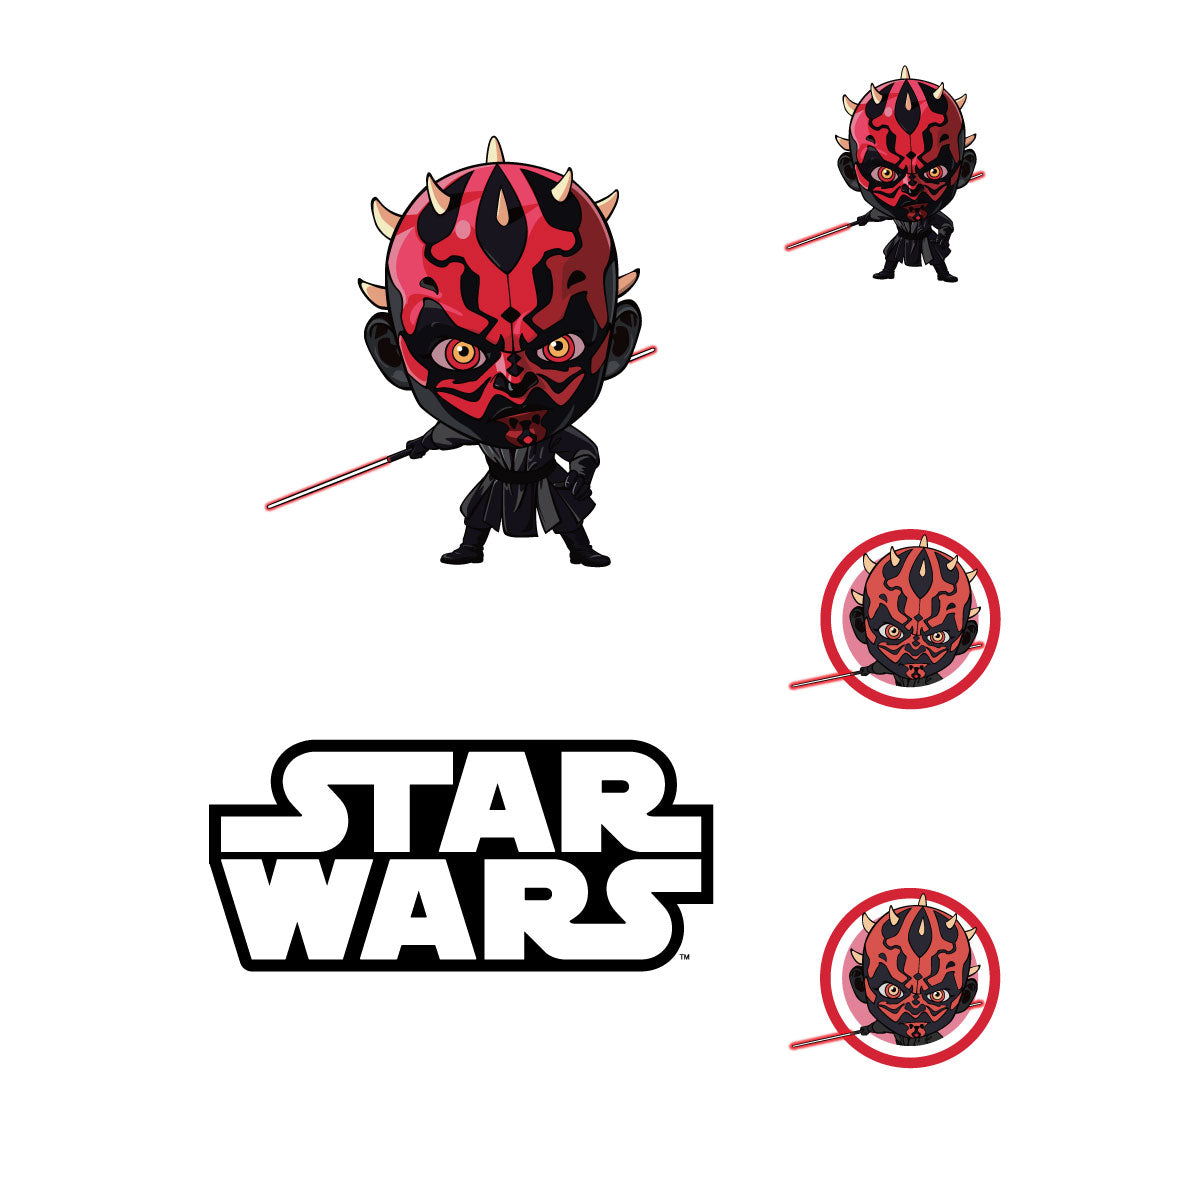 Sheet of 5 -DARTH MAUL POP ART Minis        - Officially Licensed Star Wars Removable    Adhesive Decal